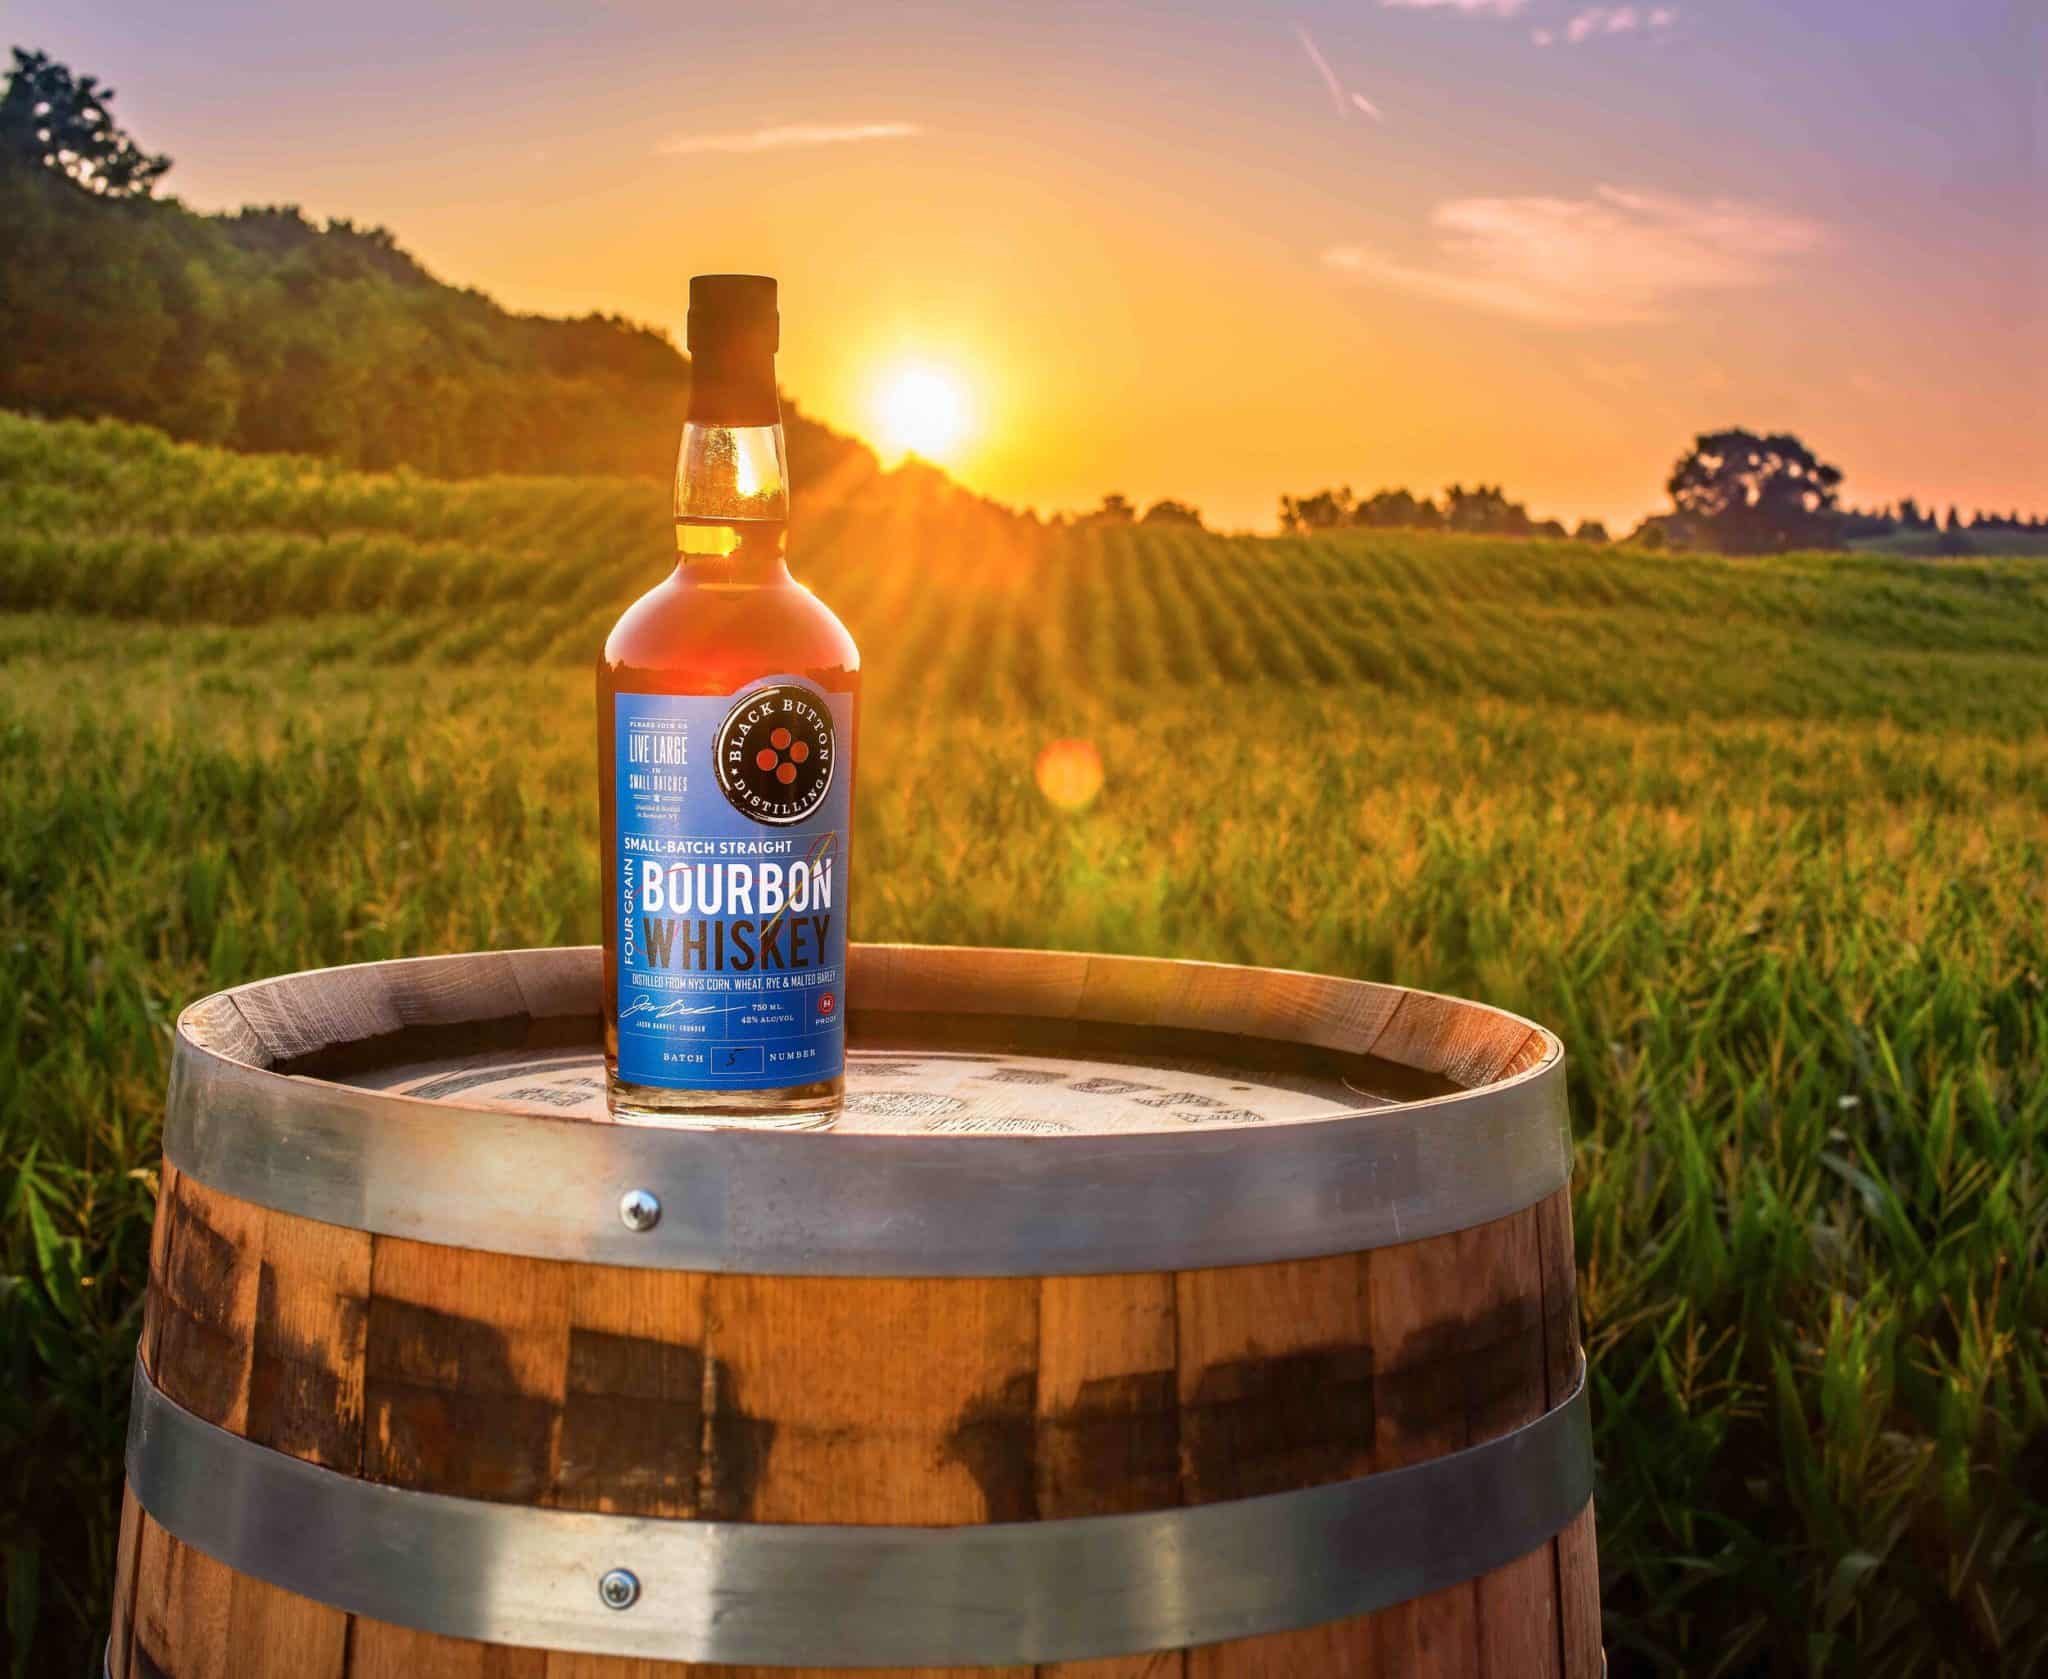 NEW YORK STATE DISTILLERS GUILD ANNOUNCES 2020 ECONOMIC IMPACT STUDY: BLACK BUTTON DISTILLING MAKES THEIR MARK ON EMPIRE STATE